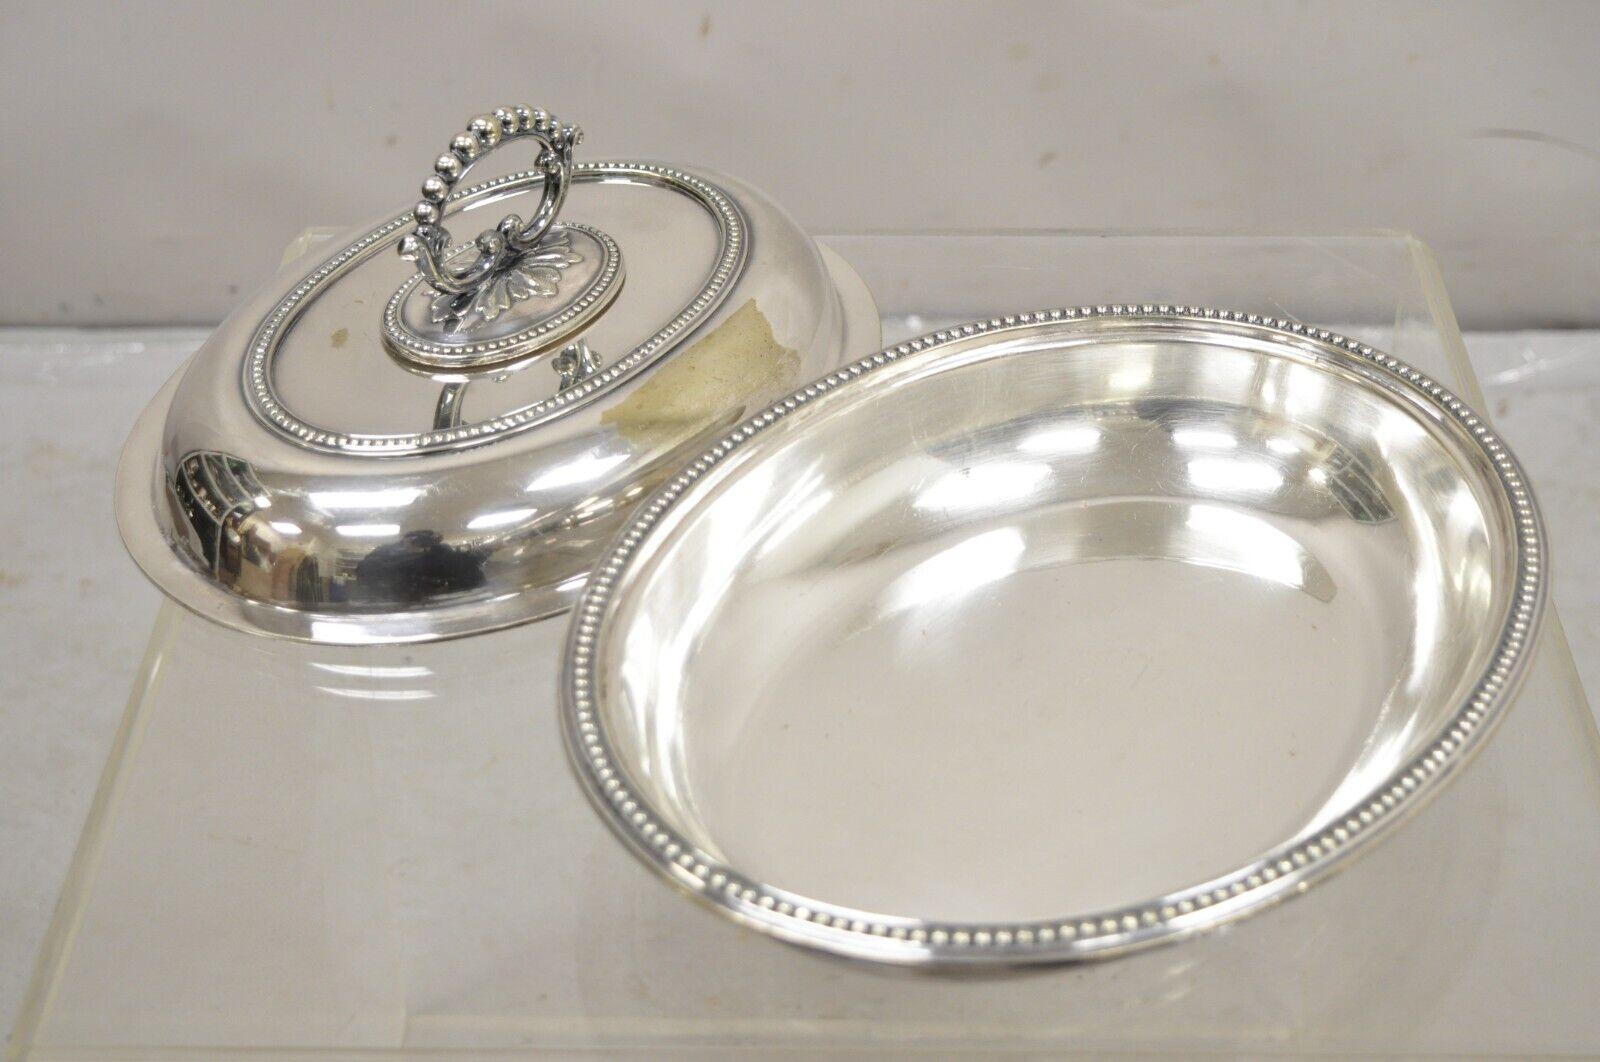 Mappin & Webb's Prince's Plate English Sheffield Silver Plated Covered Dish For Sale 1